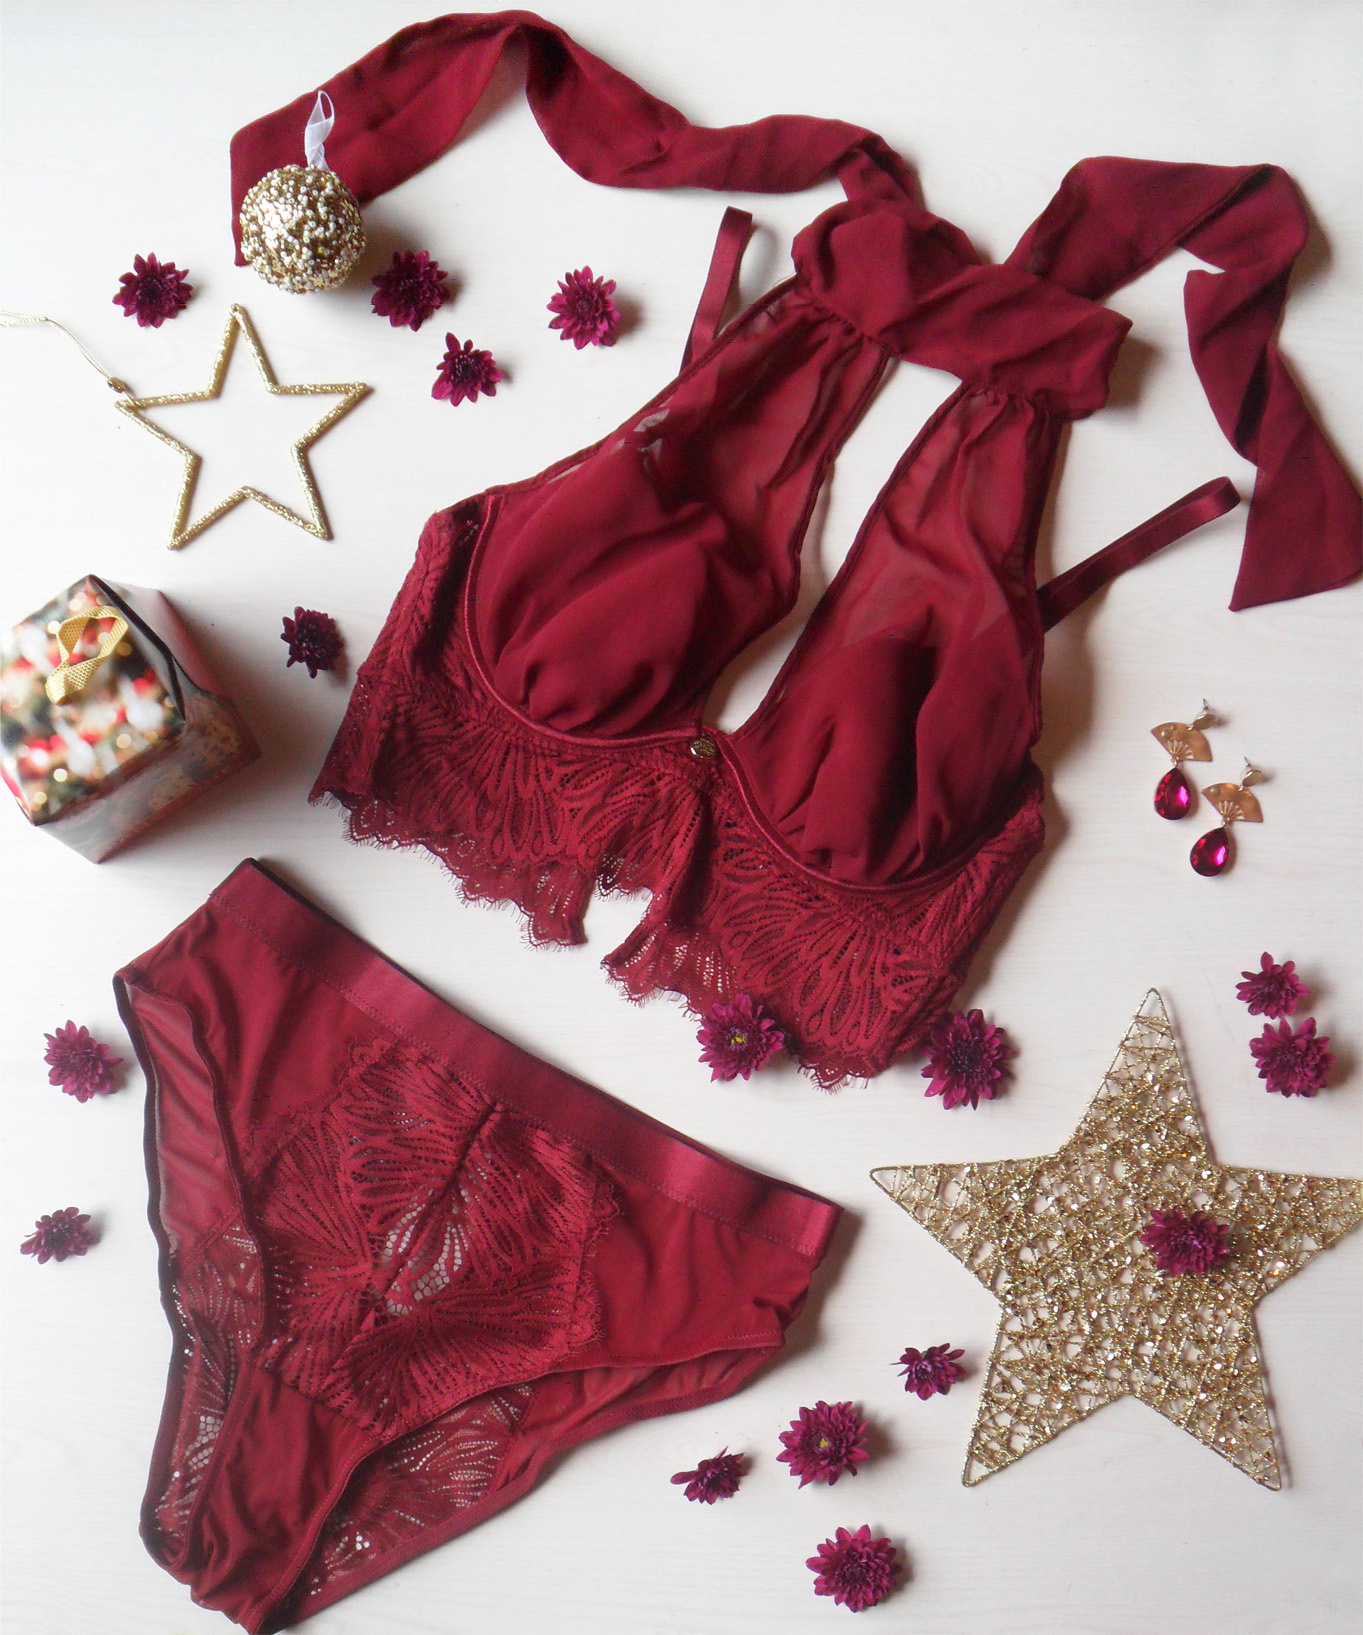 Meritta Bra - With love and passion for Lingerie